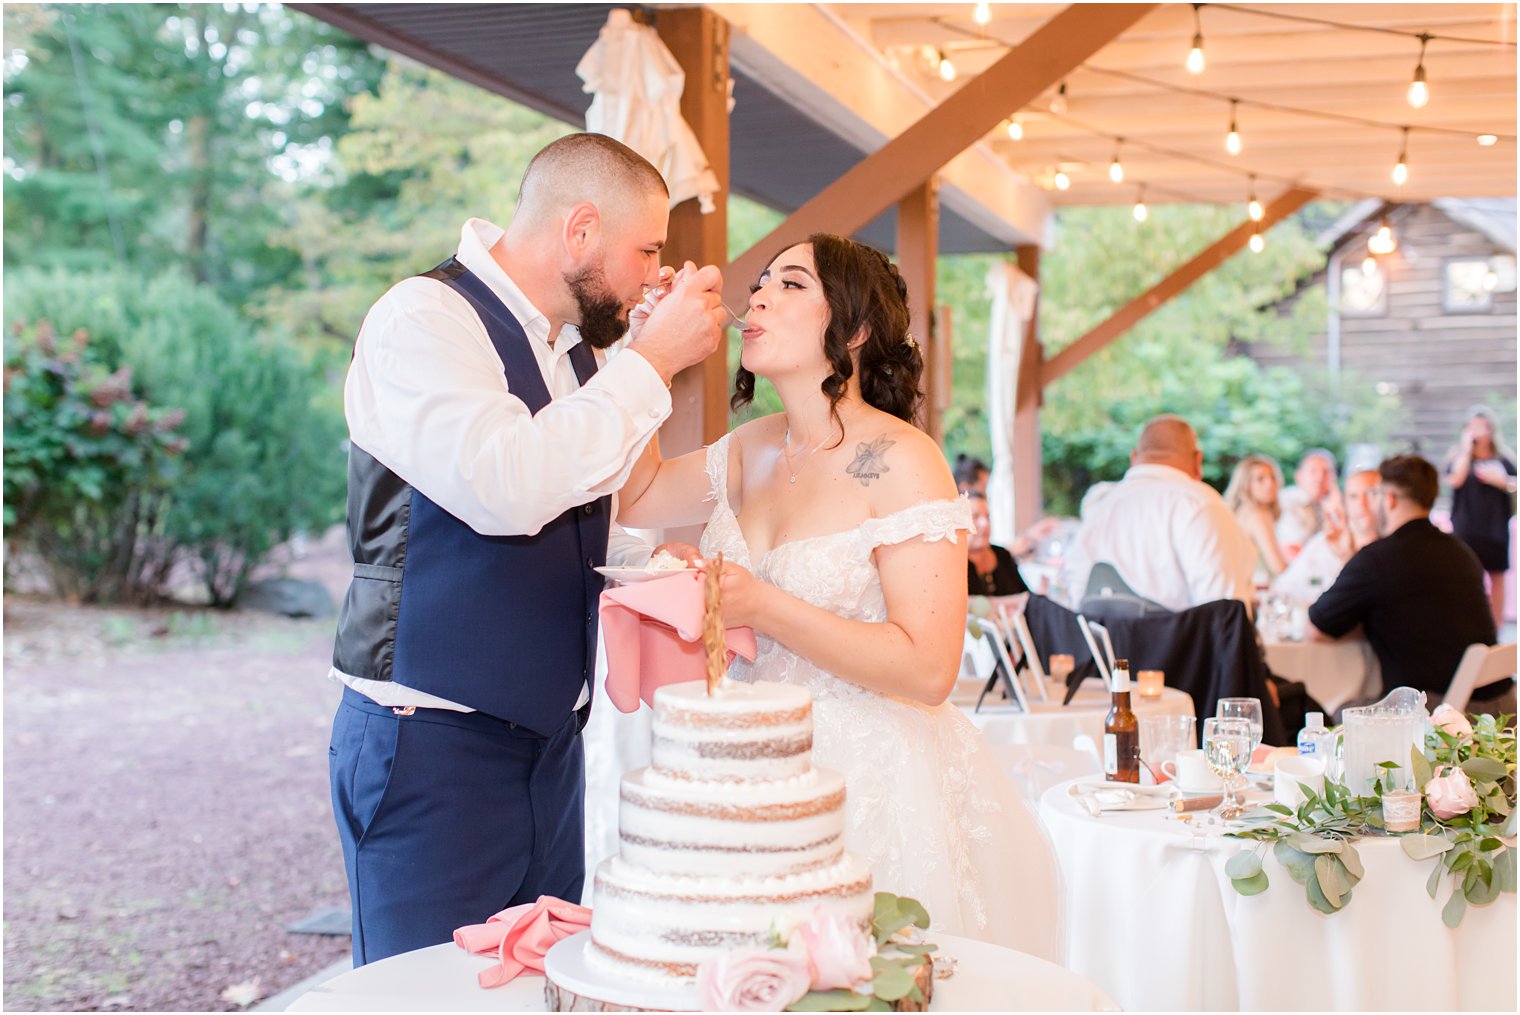 newlyweds feed each other cake during NJ wedding reception at park 